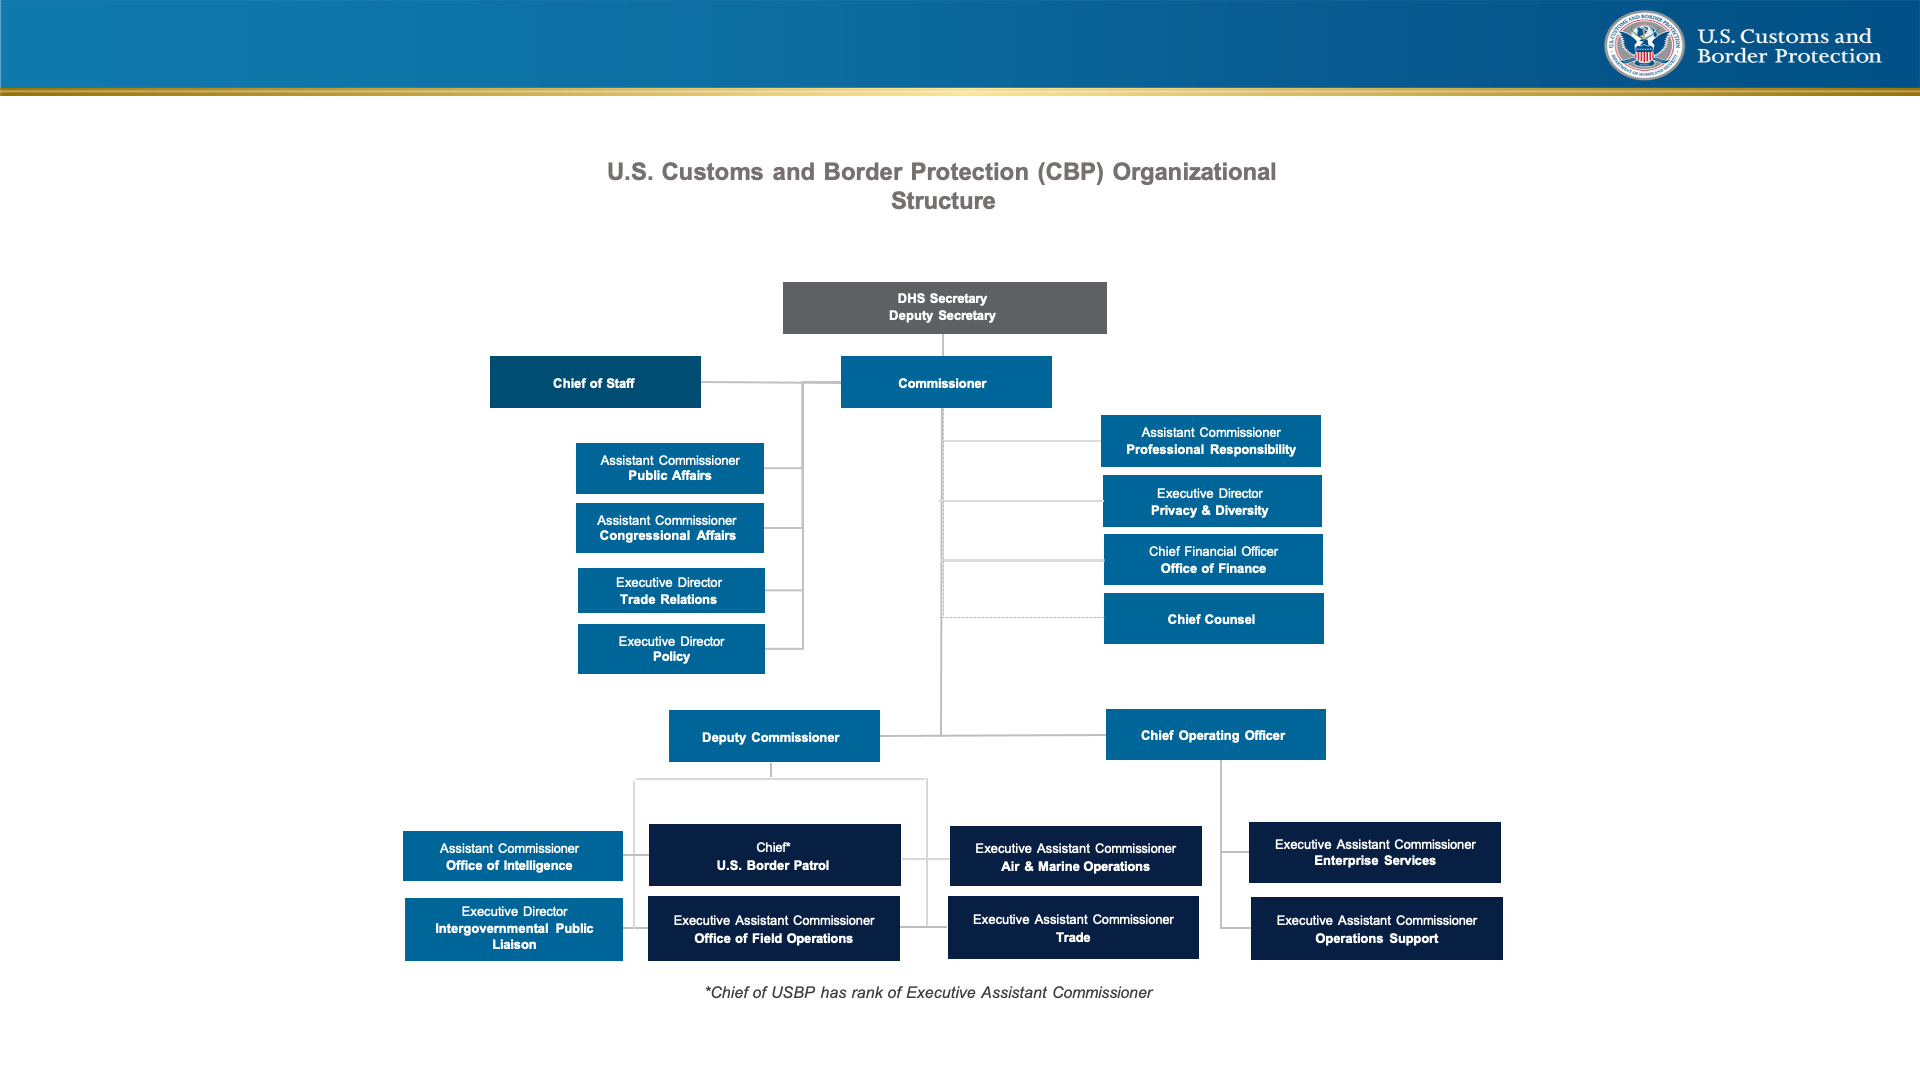 Organizational chart for U.S. Customs and Border Protection - DHS Secretary and Undersecretary at the top with the Commissioner reporting to them. Chief of Staff reports to Commissioner, along with Assistant Commissioner of Public Affairs, Assistant Commissioner of Congressional Affairs, Executive Director of Trade Relations, Executive Director of Policy, Deputy Commissioner, Assistant Commissioner of Professional Responsibility, Executive Director of Policy & Diversity, Chief Financial Officer of Office of Finance, Chief Counsel, Chief Operating Officer. Reporting to Deputy Commissioner are Assistant Commissioner of Office of Intelligence, Executive Director of Intergovernmental Affairs, Chief of U.S. Border Patrol, Executive Assistant Commissioner of Office of Field Operations, Executive Assistanct Commissioner of Air & Marine Operations, and Executive Assistant Commissioner of Trade. Reporting to Chief Operating Officer is Executive Assistant Commissioner of Enterprise Services and Executive Assistant Commissioner of Operations Support.